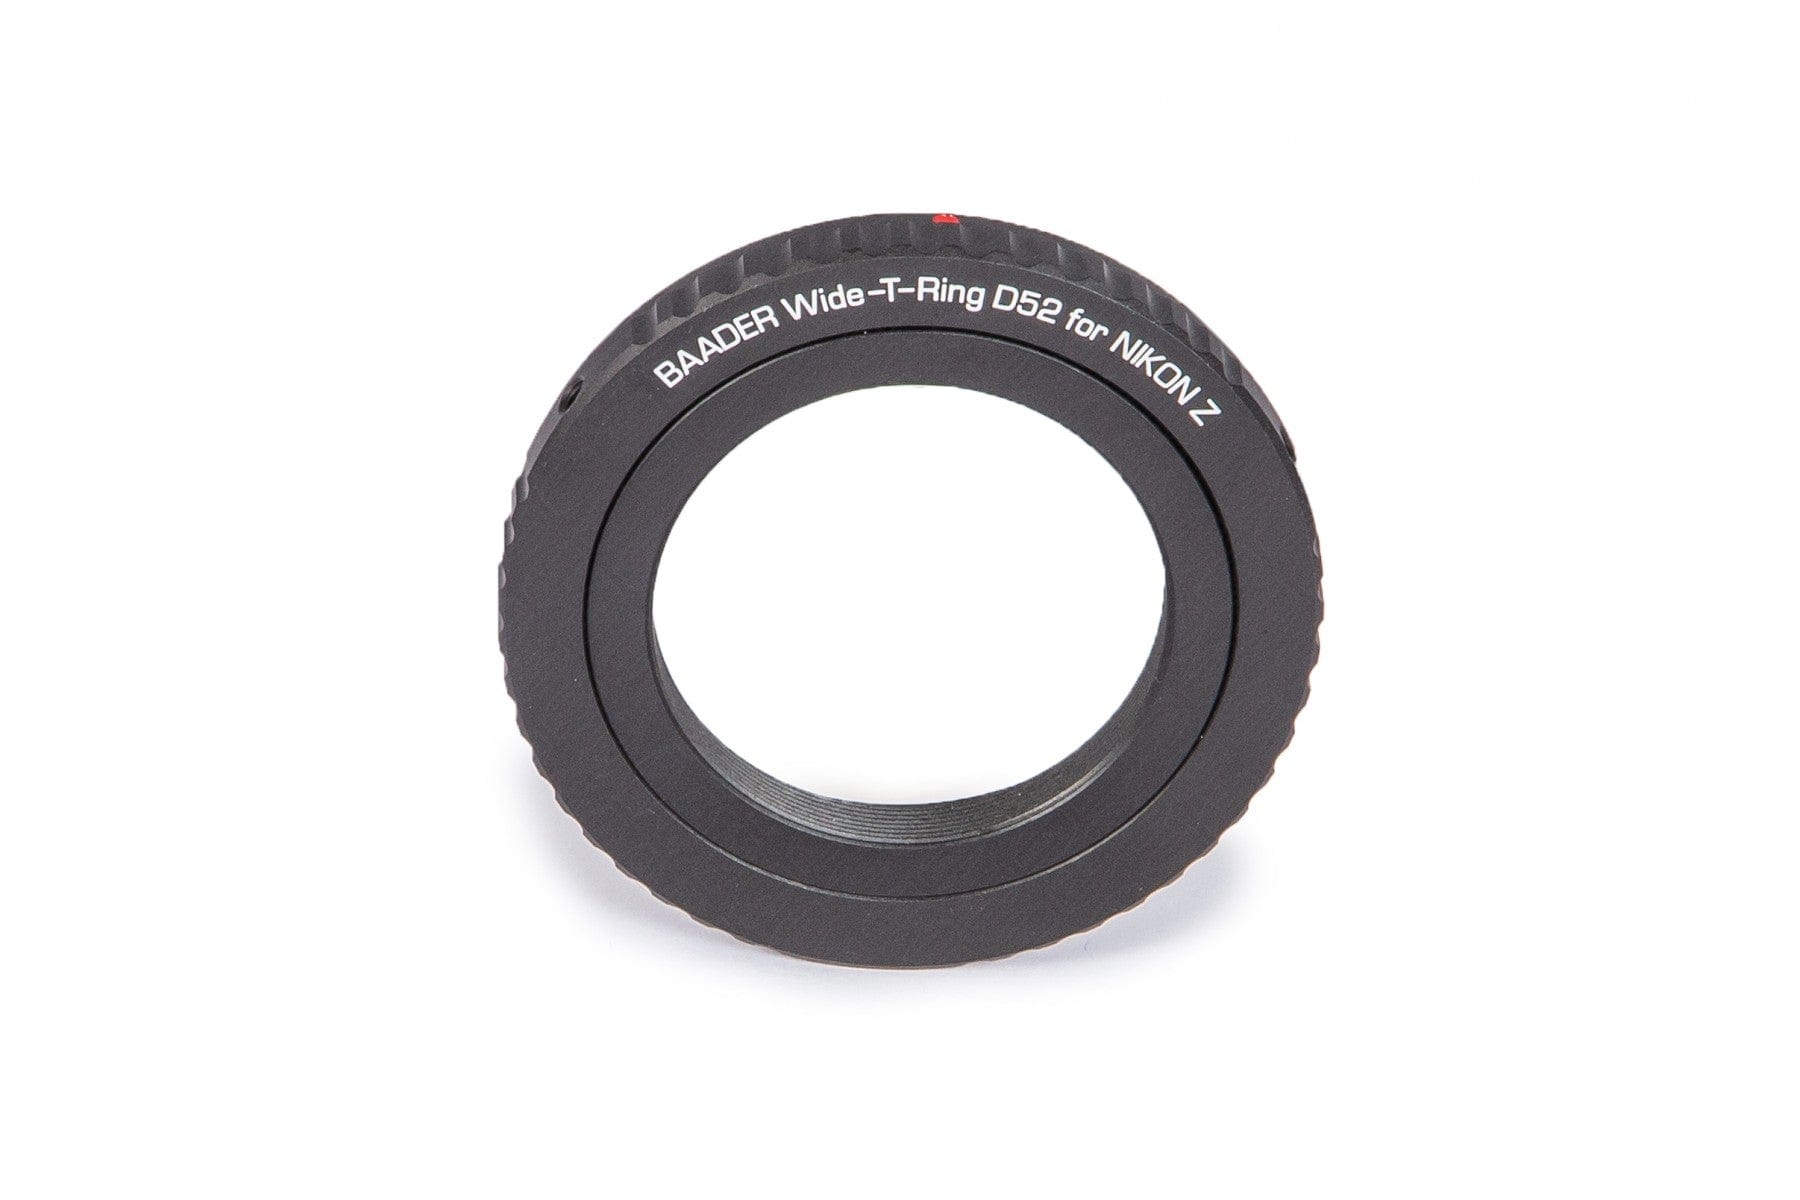 Baader Planetarium Accessory Baader Wide T-Ring Nikon Z (for Z bayonet) with D52i to T-2 and S52 - 2408335